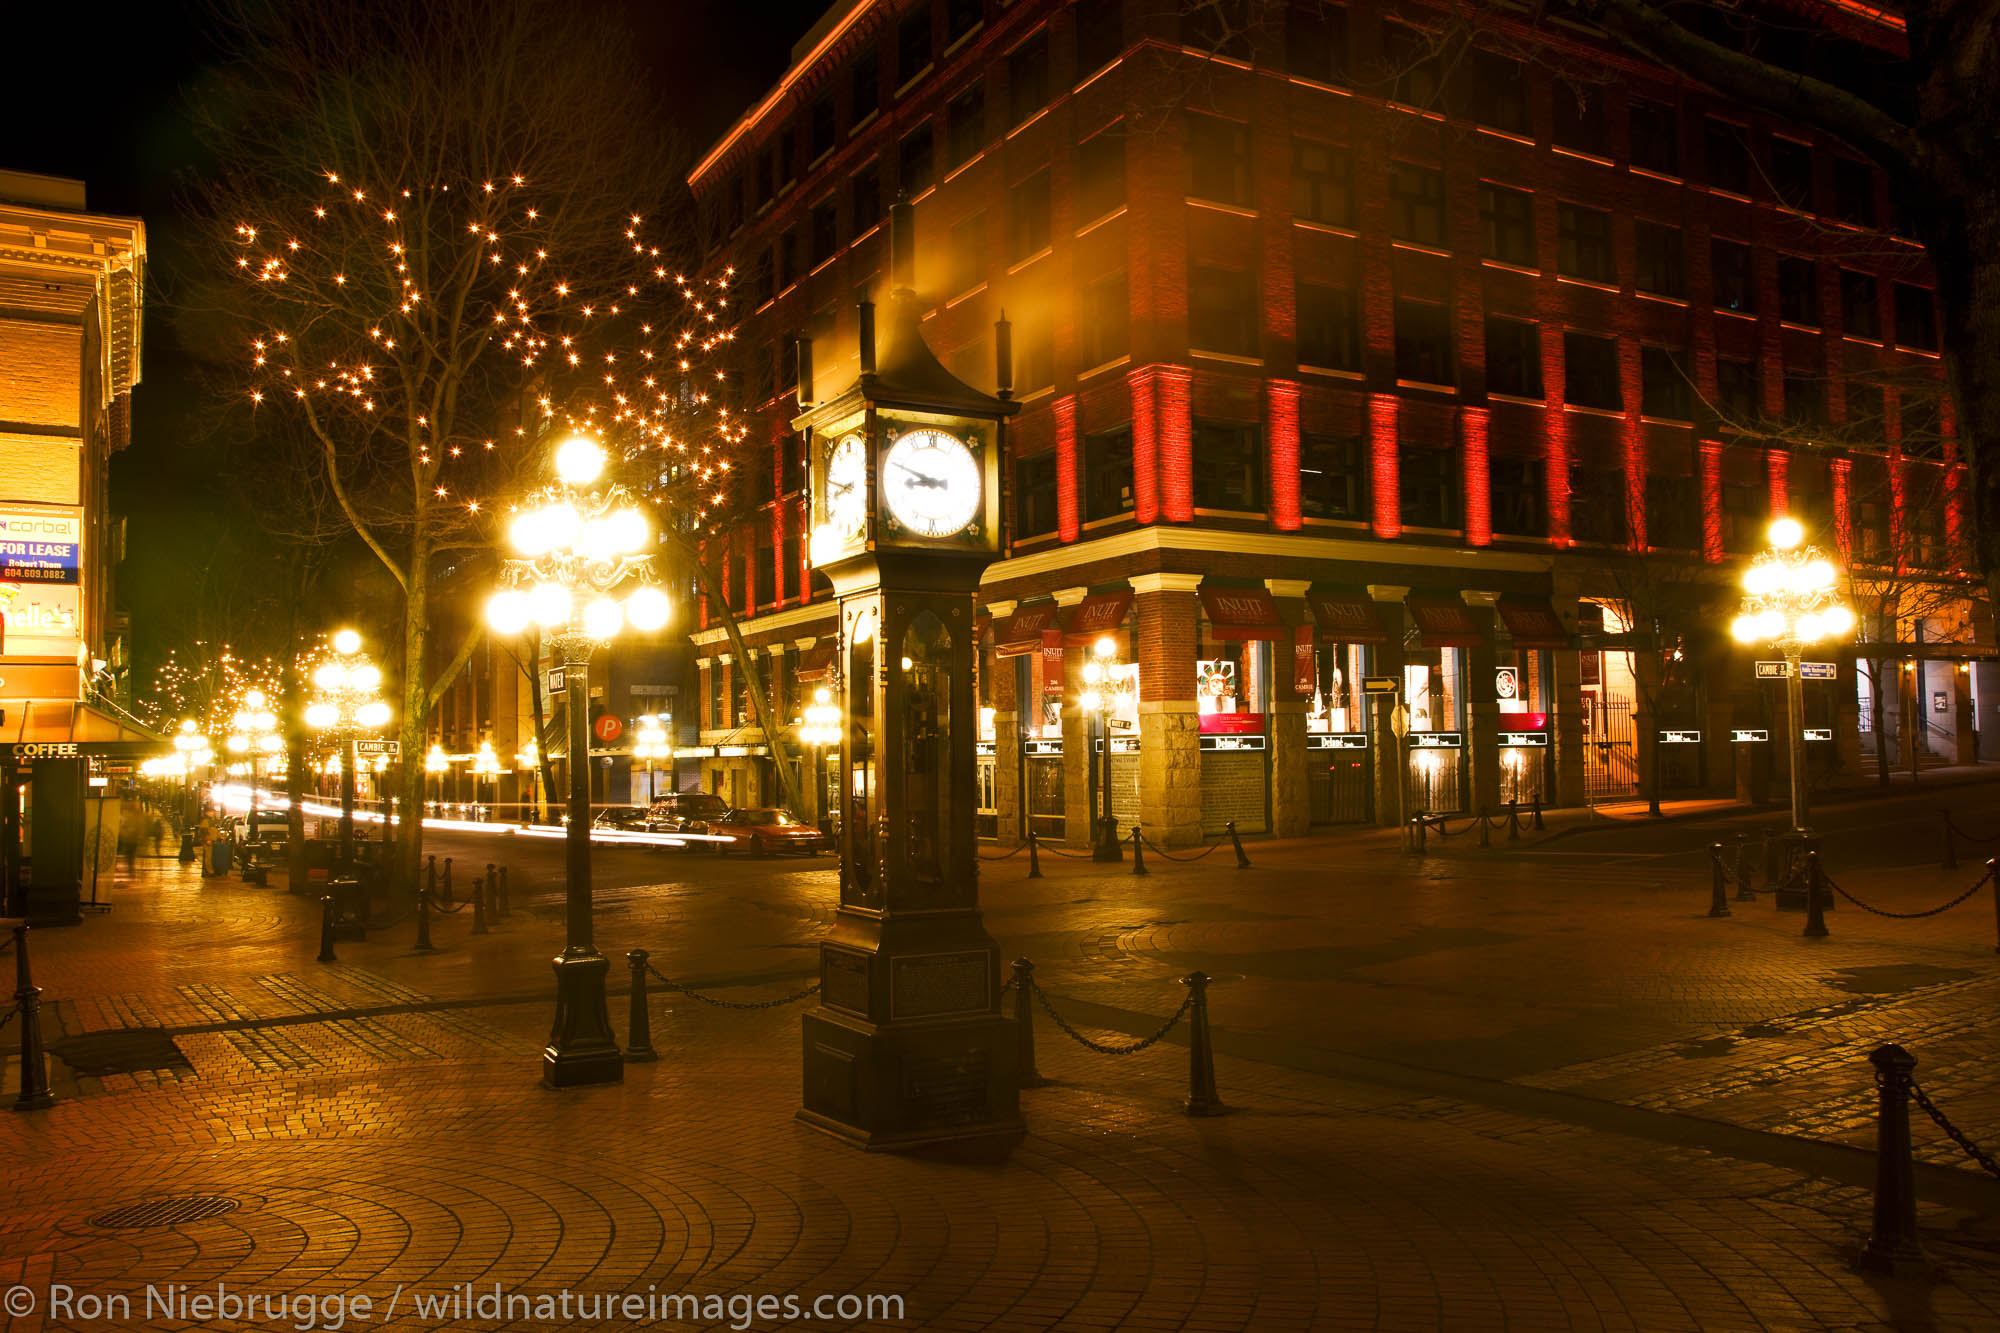 The historic steam powered clock in the Gastown area, Vancouver, British Columbia, Canada.